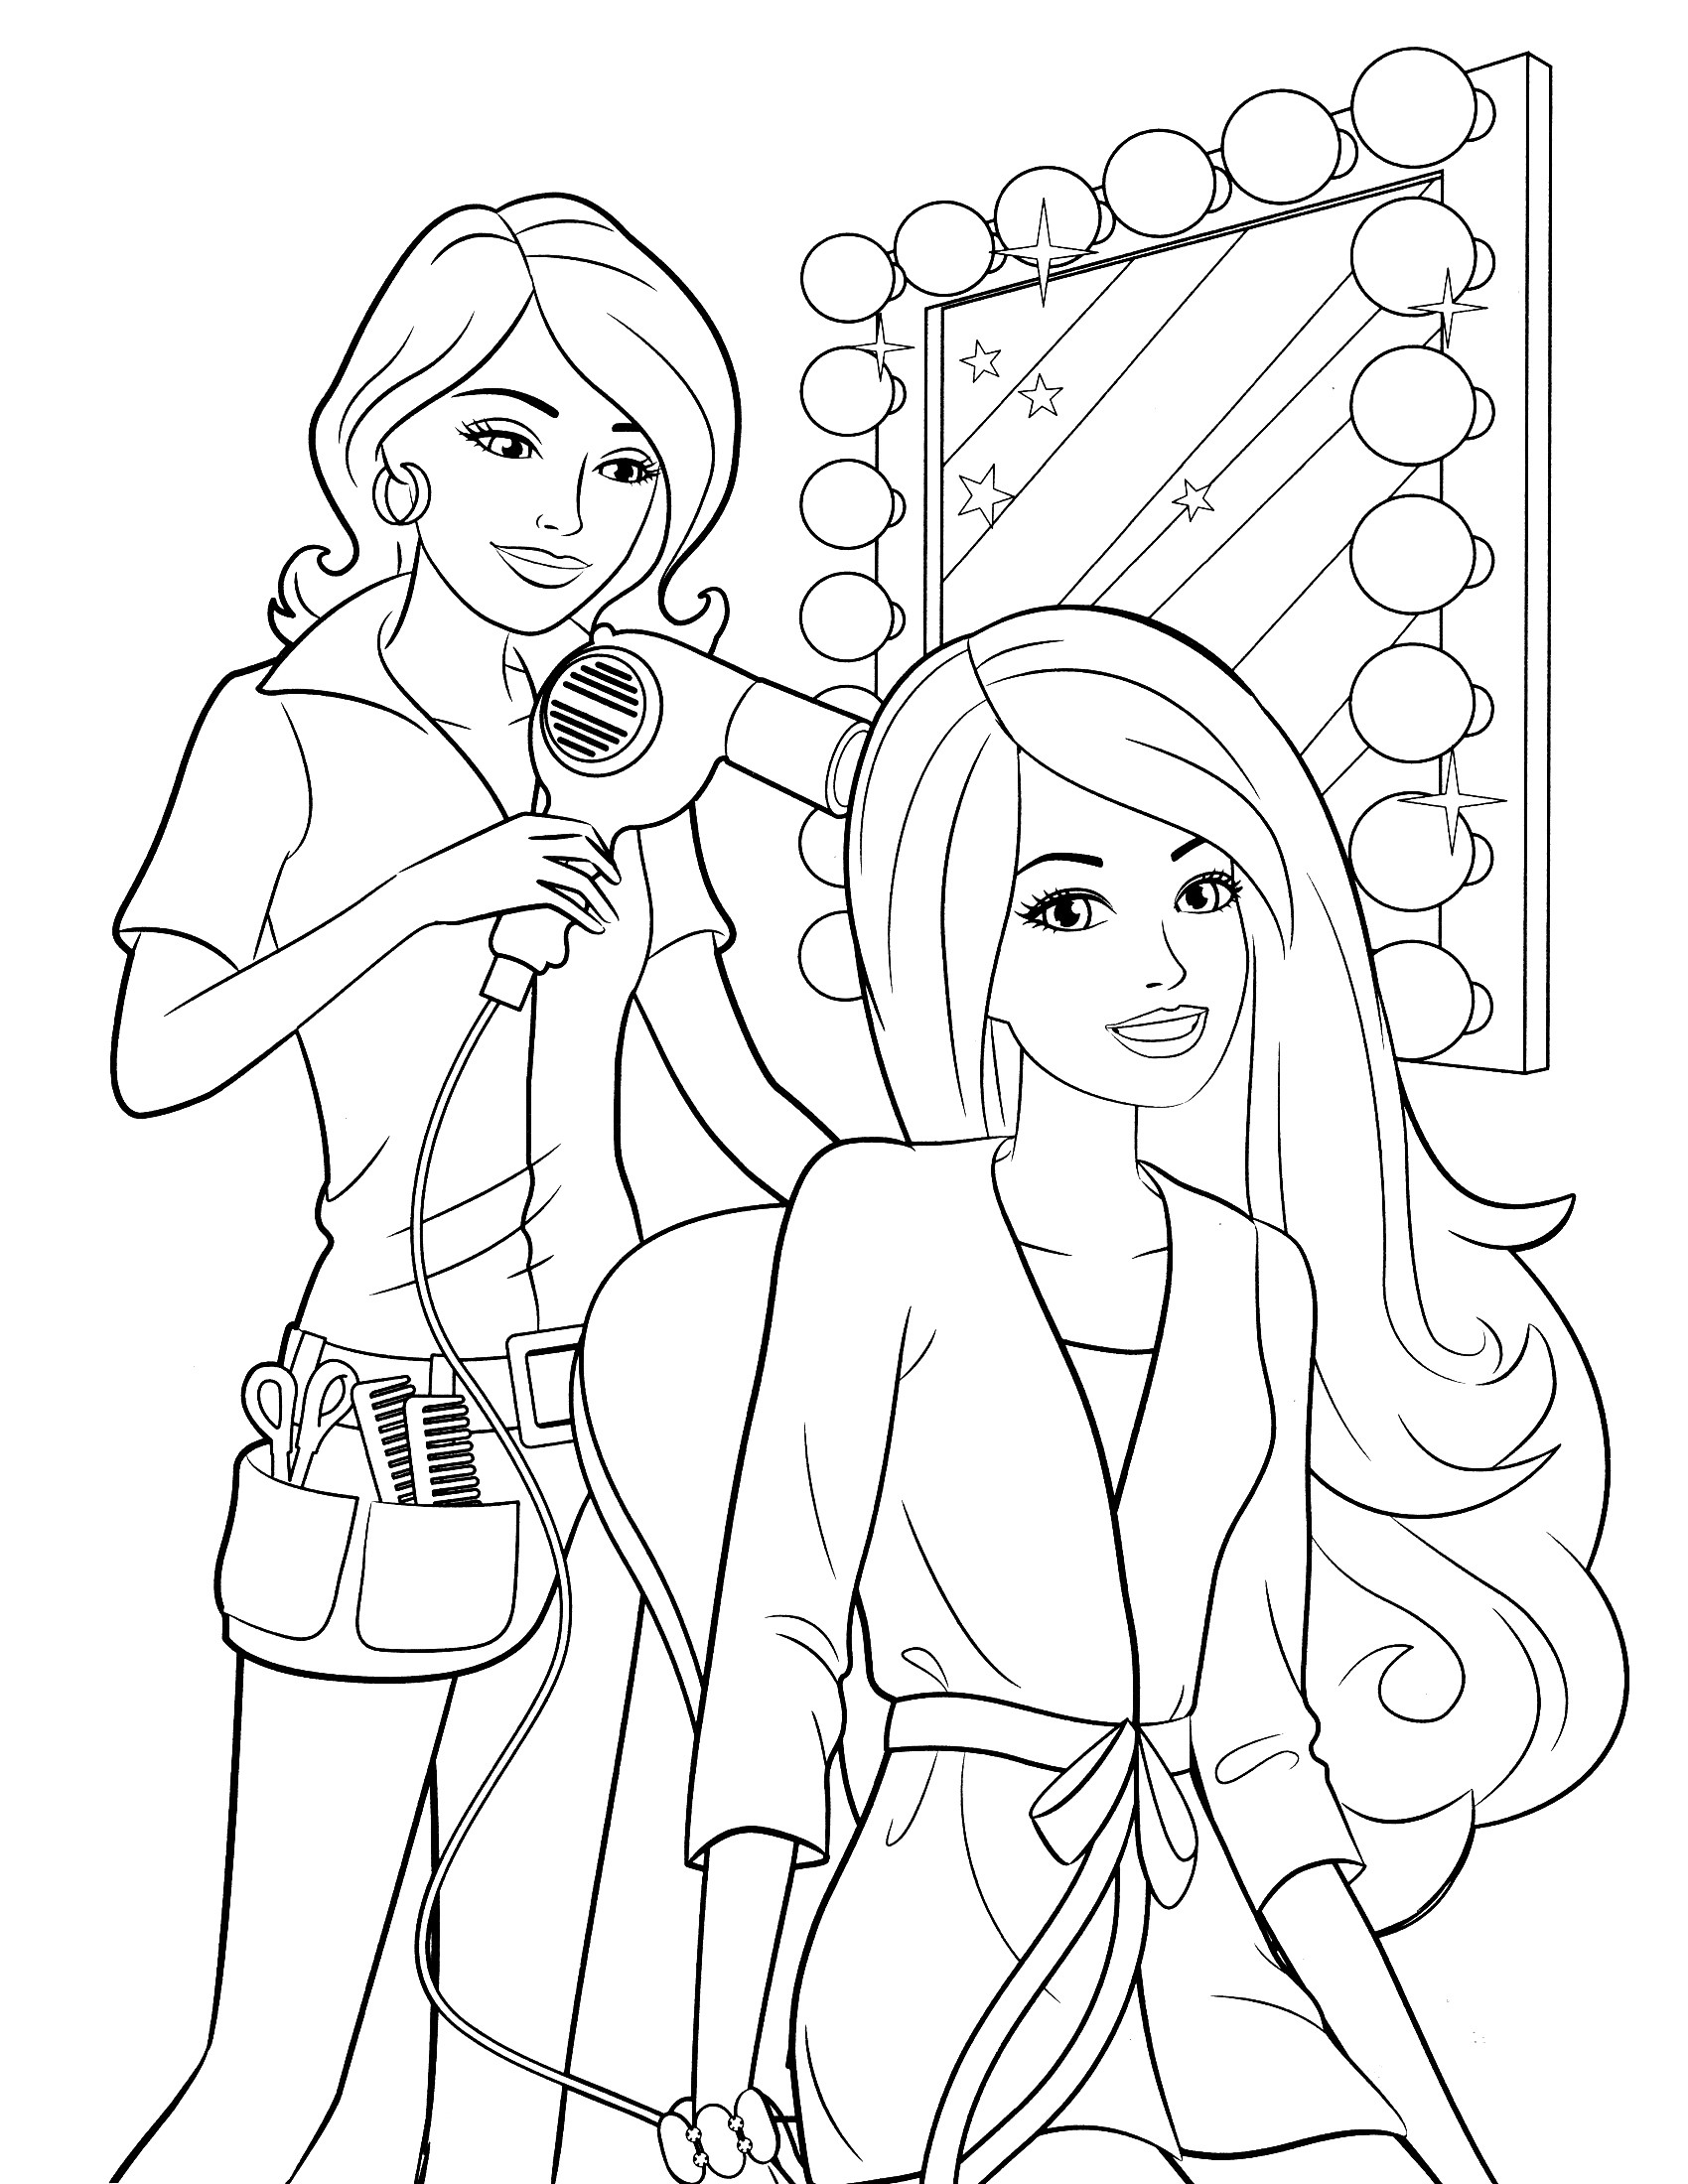 Coloring Pages For Girls Pdf
 Coloring Pages for Girls Best Coloring Pages For Kids